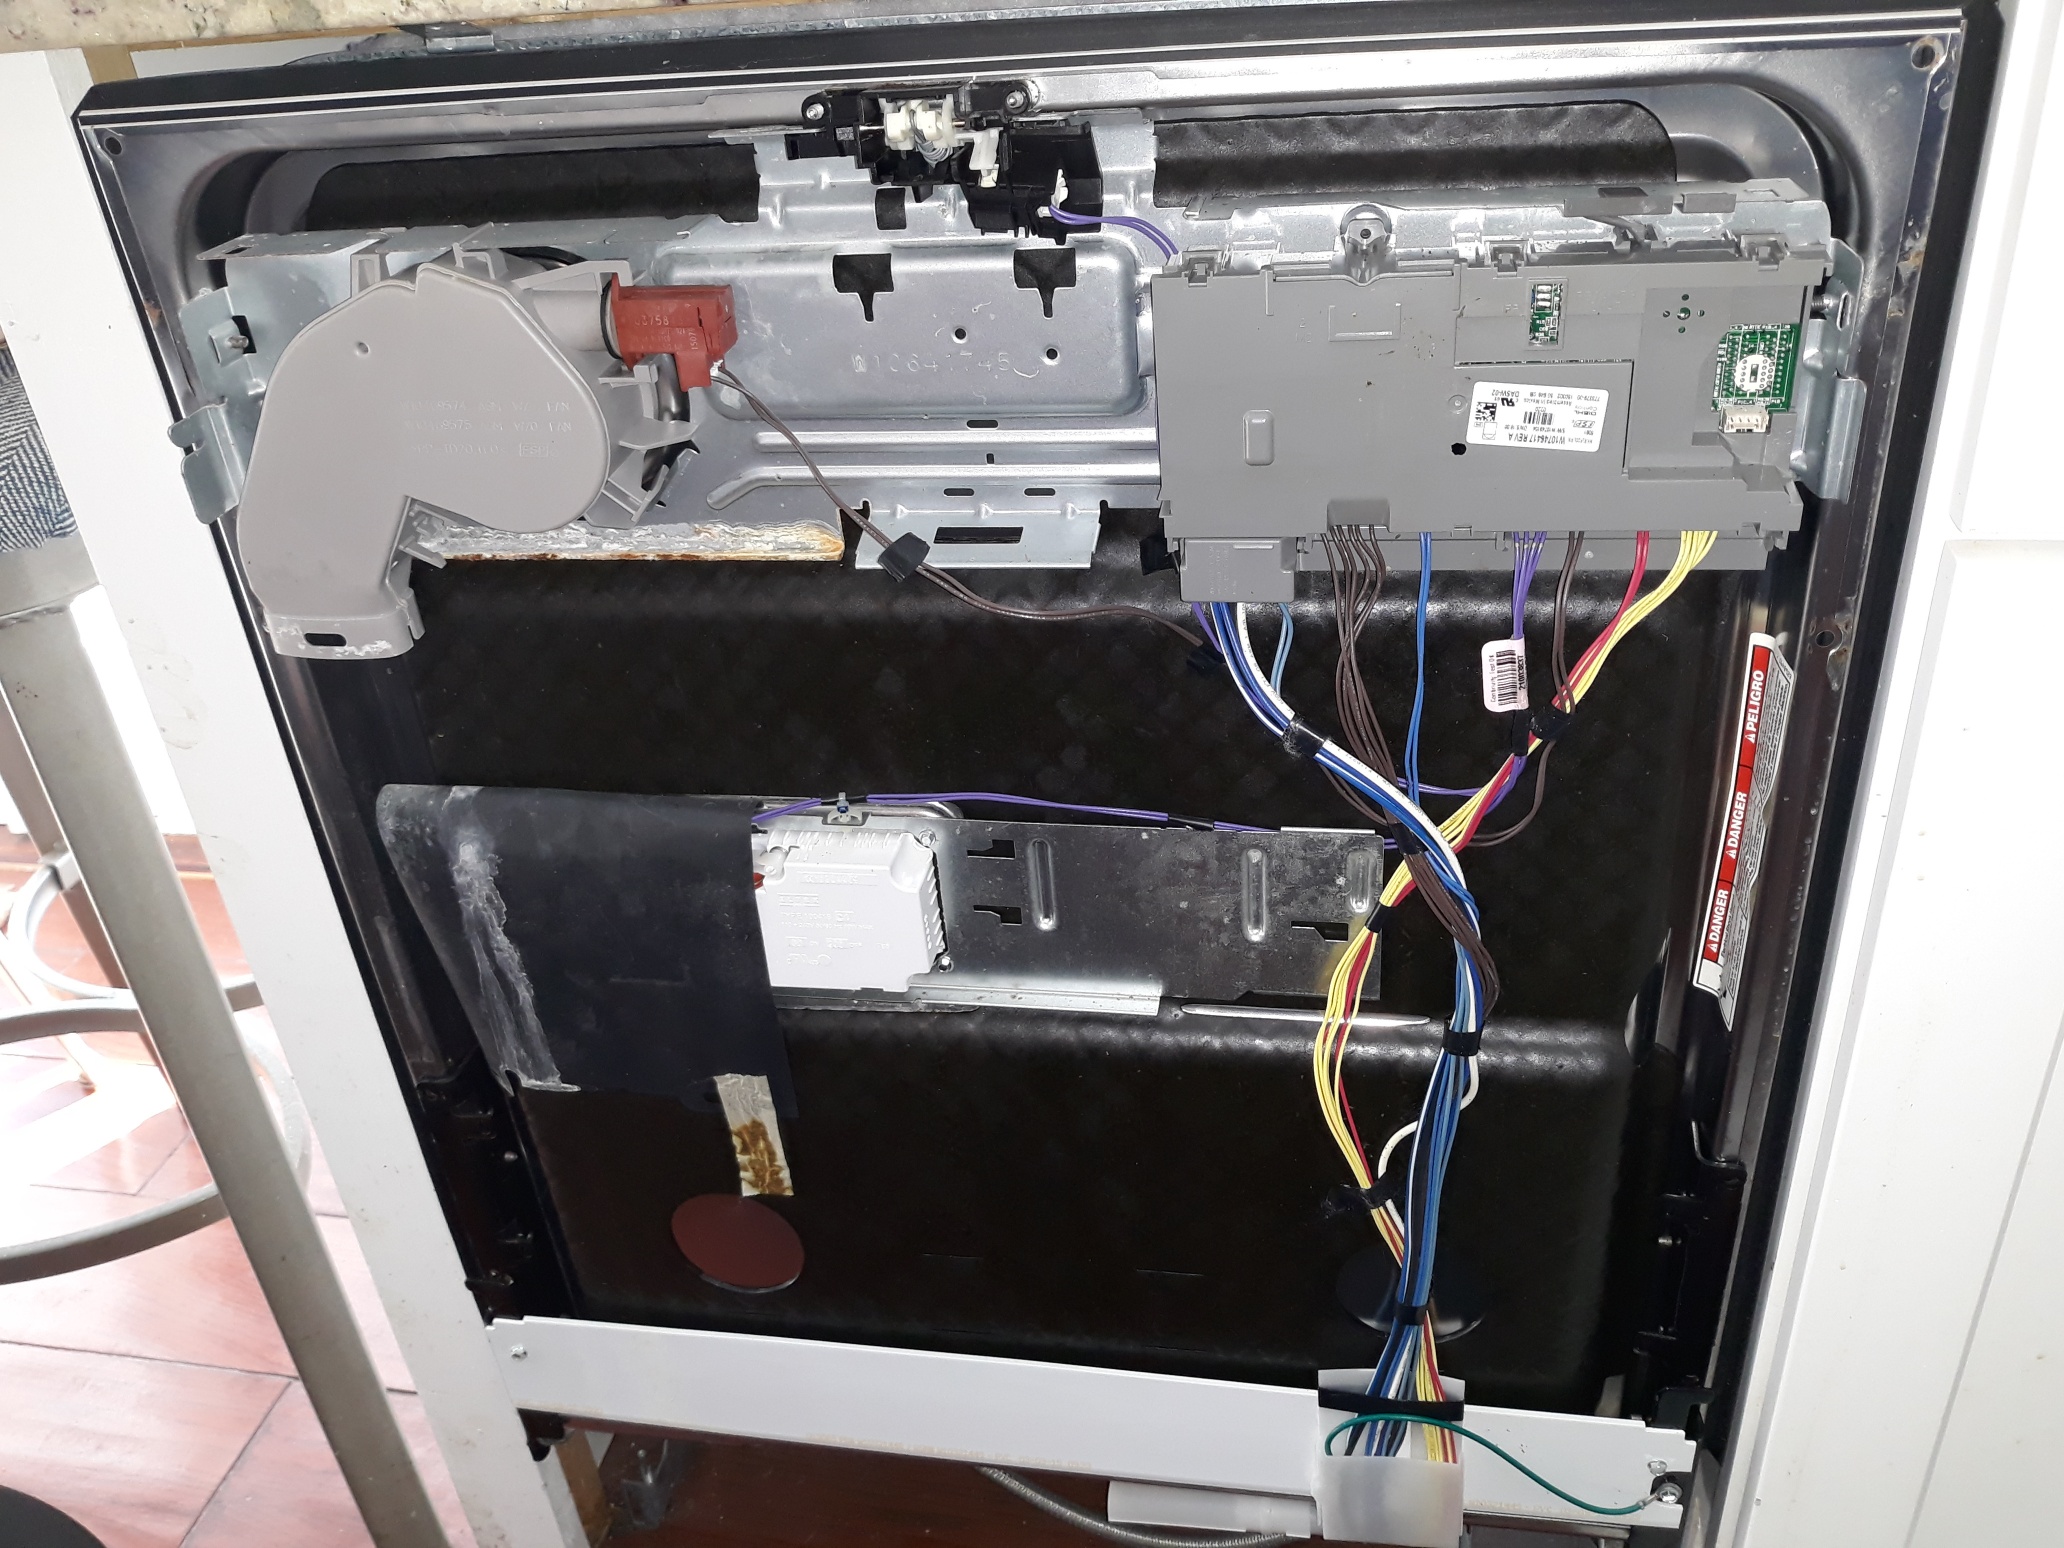 appliance repair dishwasher repair replacement of the main control board due to internal circuits shorted chesterton avenue sky lake orlando fl 32809